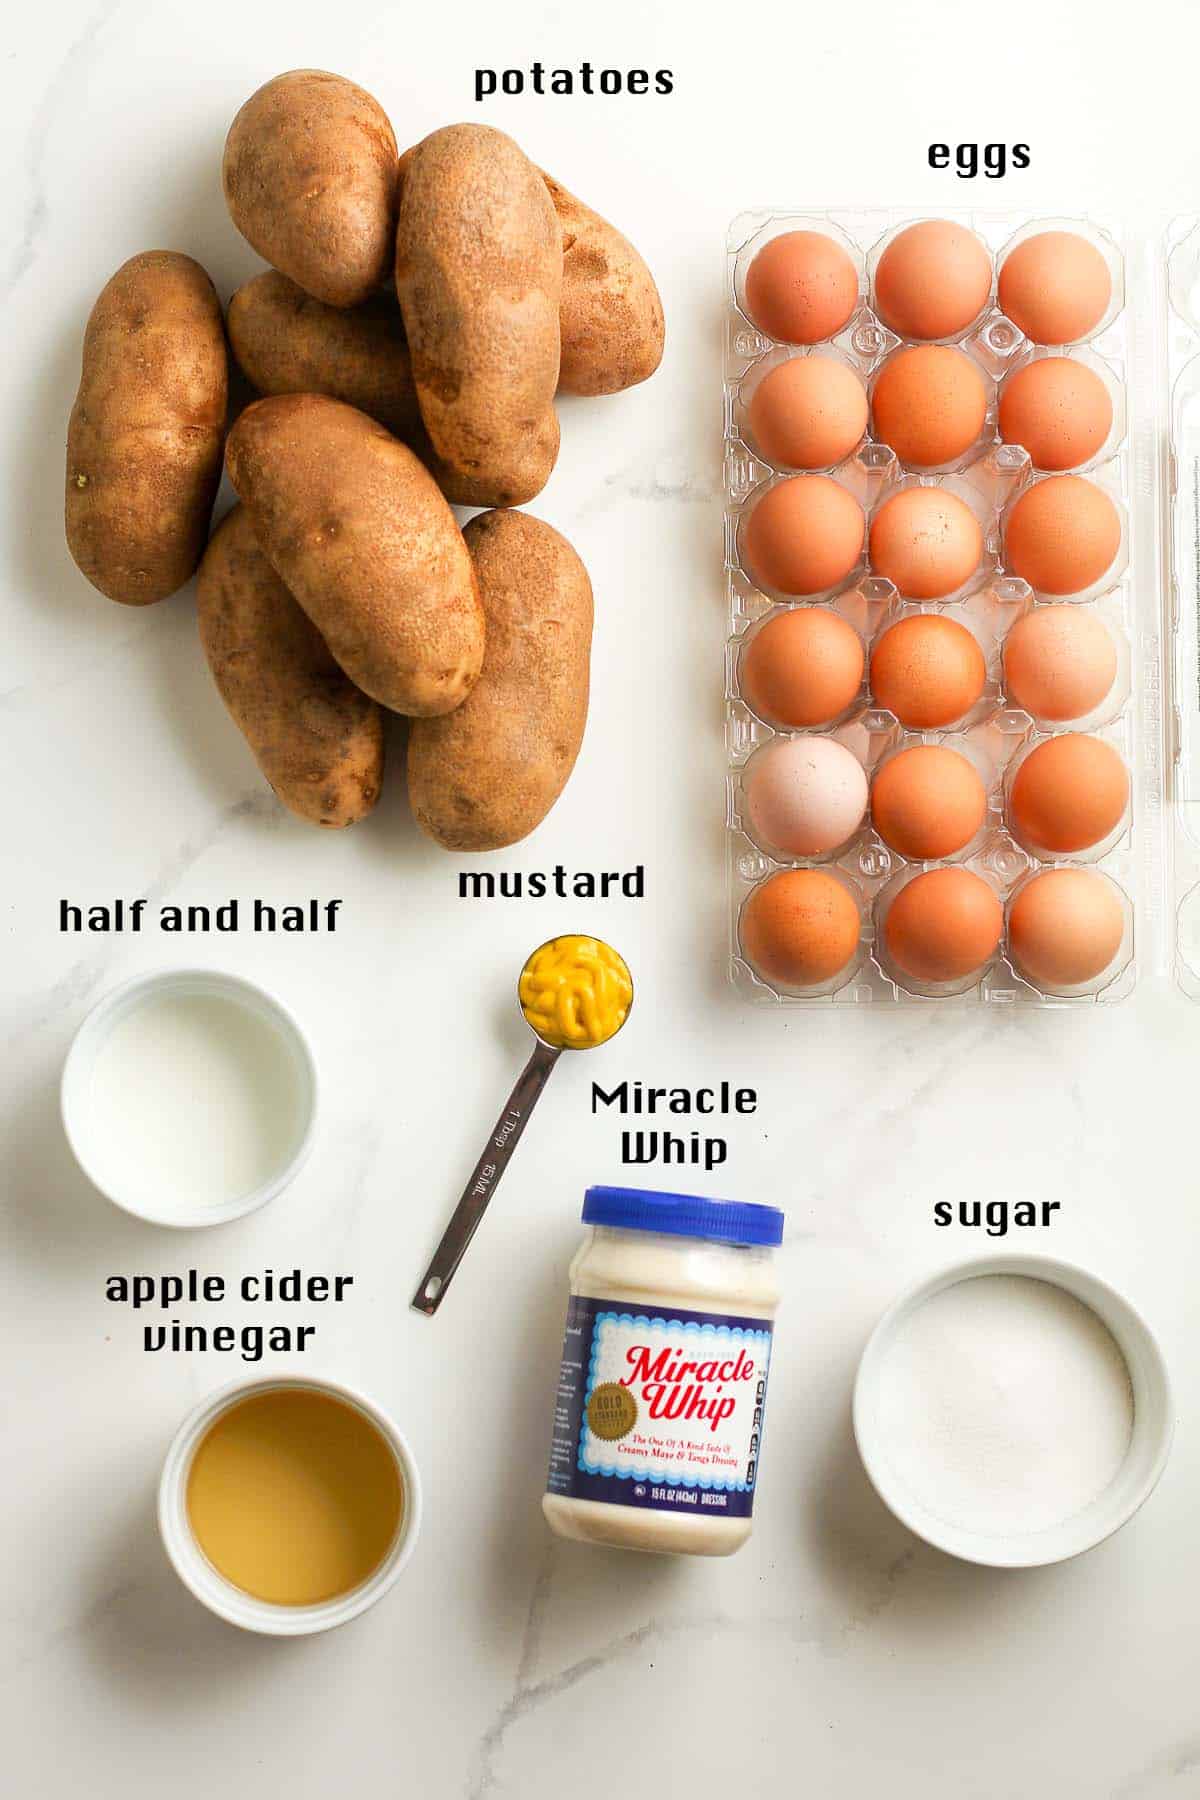 All of the potato salad ingredients on a white background.